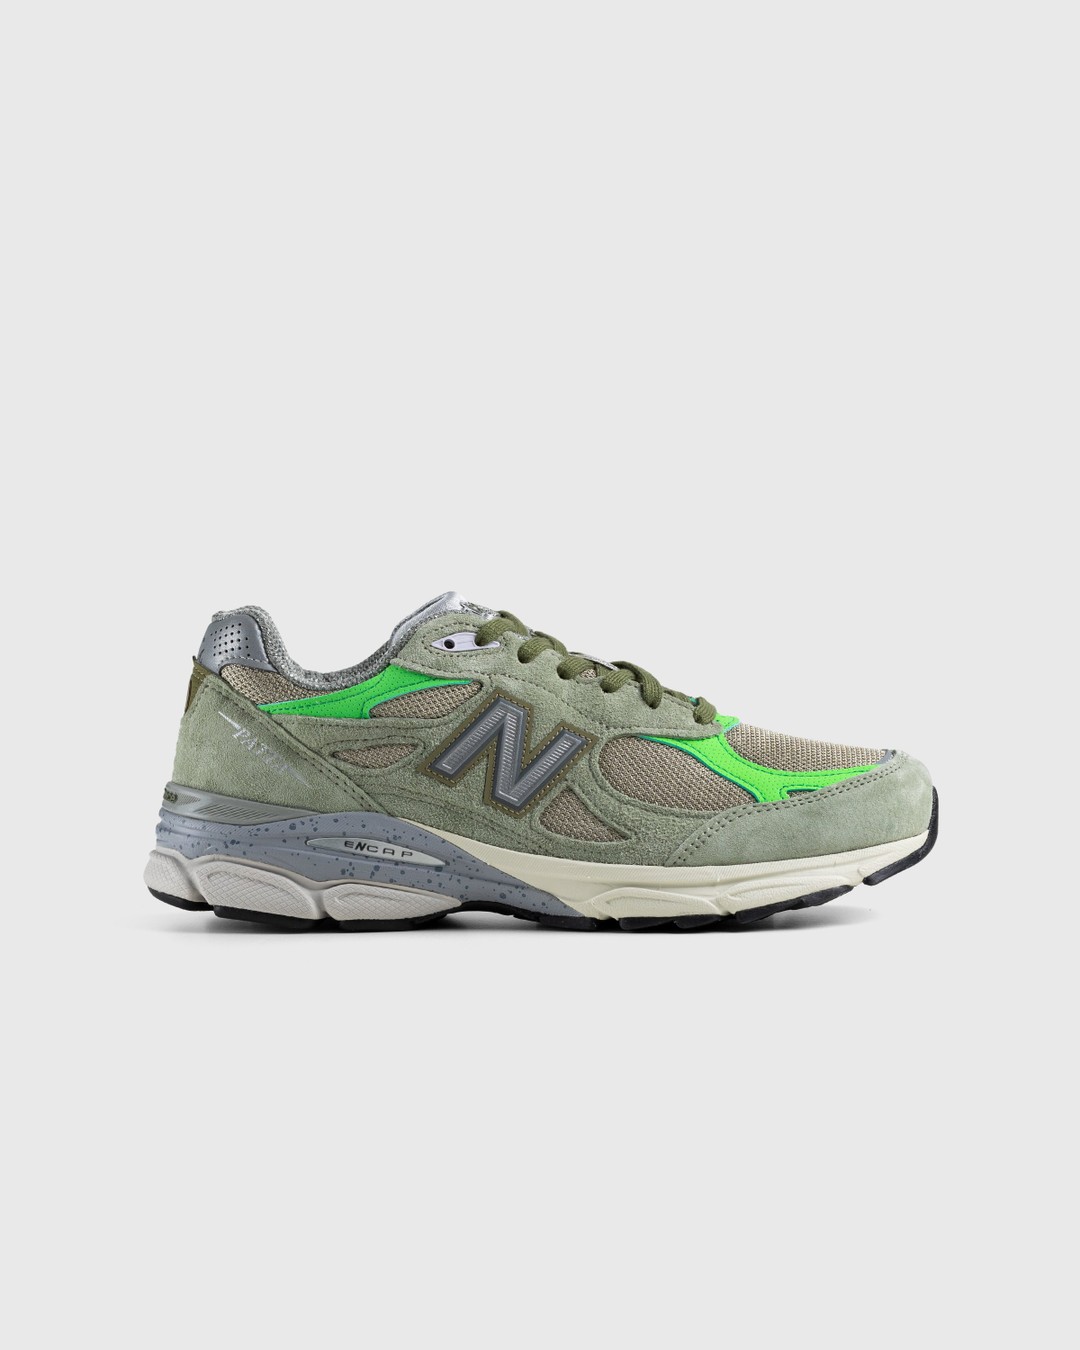 Patta x New Balance – M990PP3 Made in USA 990v3 Olive/White Pepper - Sneakers - Green - Image 1